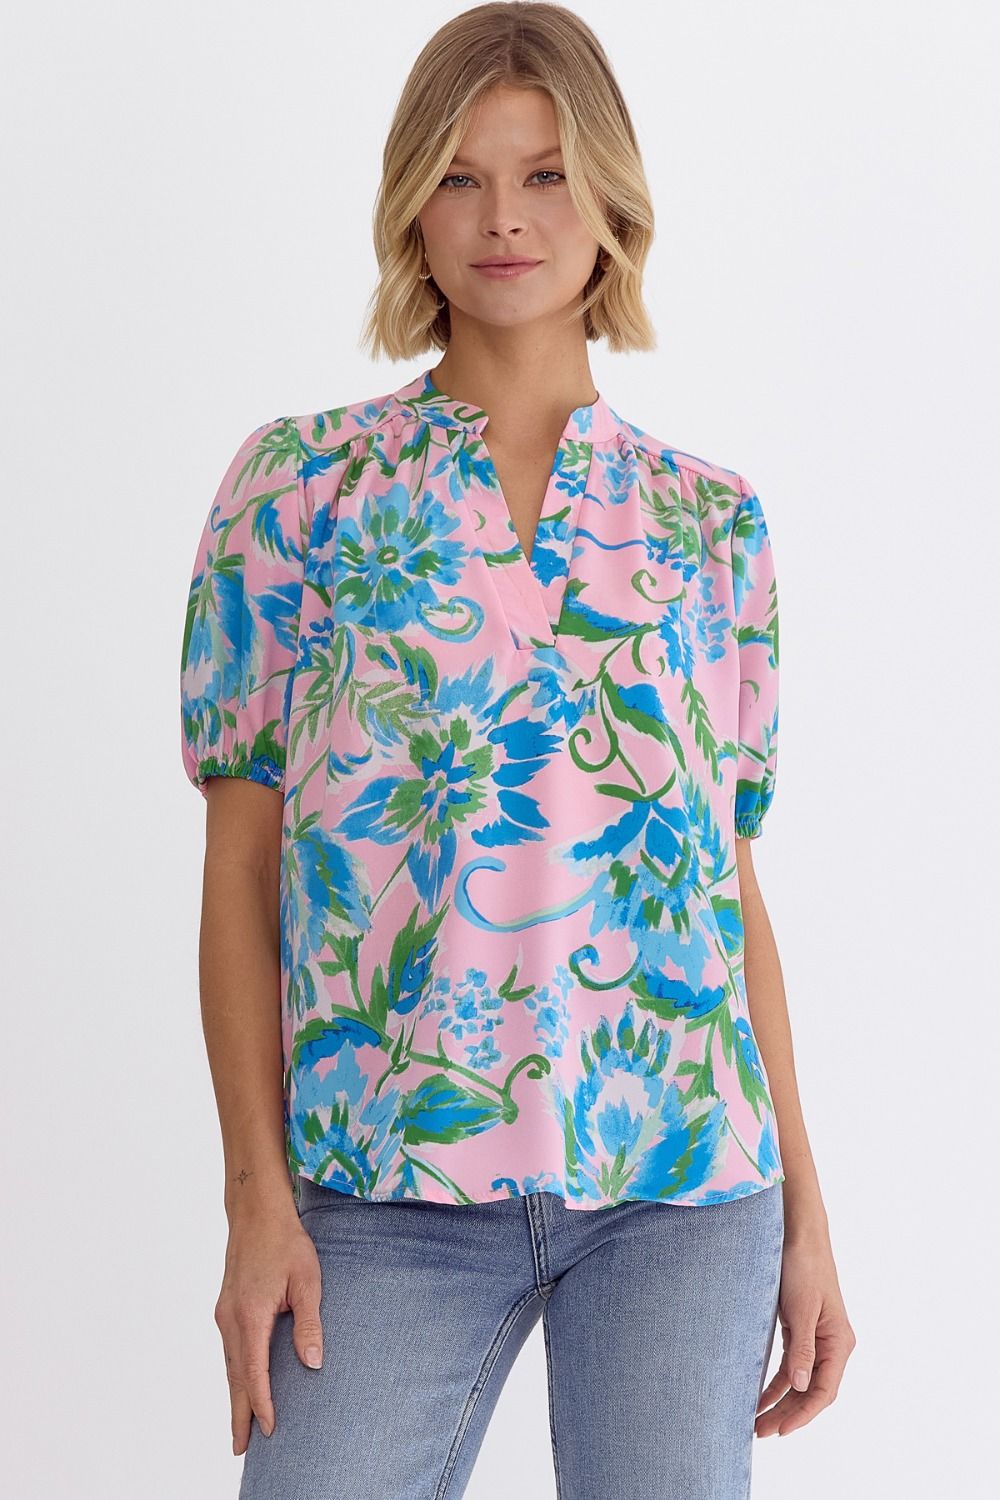 Printed v-neck short sleeve top featuring elastic at sleeves. Unlined. Woven. Non-sheer. Lightweight.